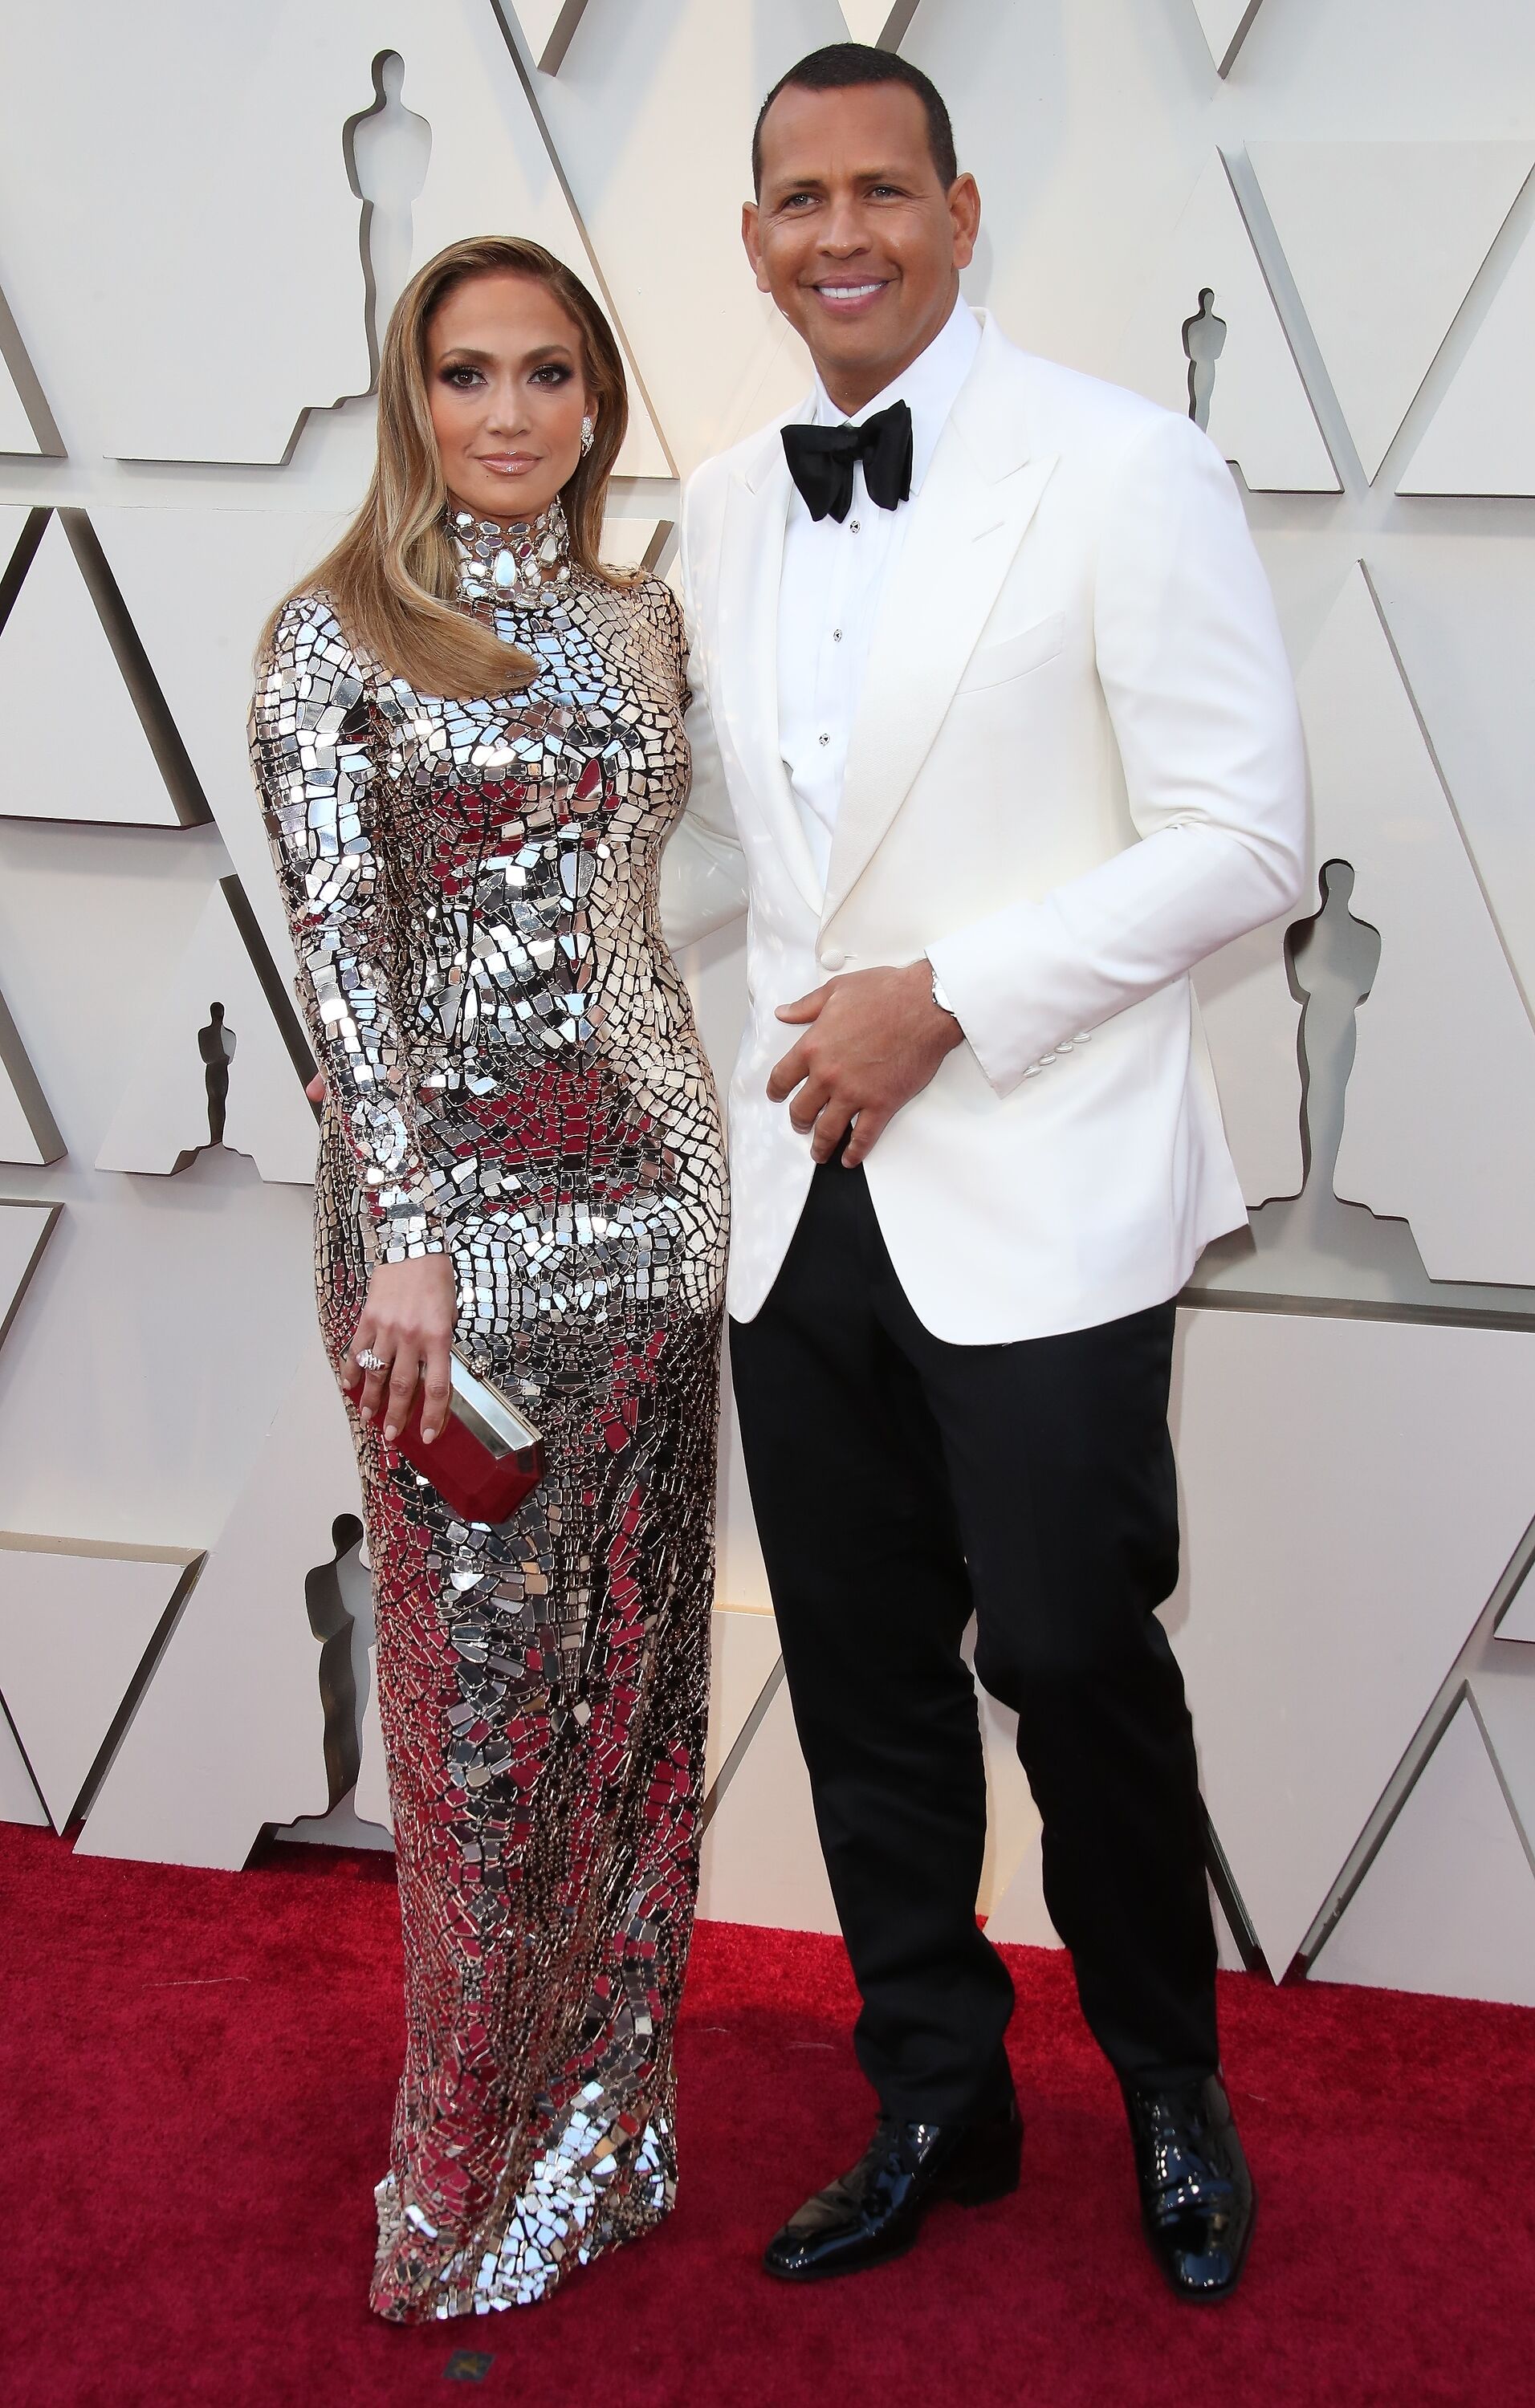  Alex Rodriguez and Jennifer Lopez at the 91st Annual Academy Awards at Hollywood and Highland on February 24, 2019 | Photo: Getty Images